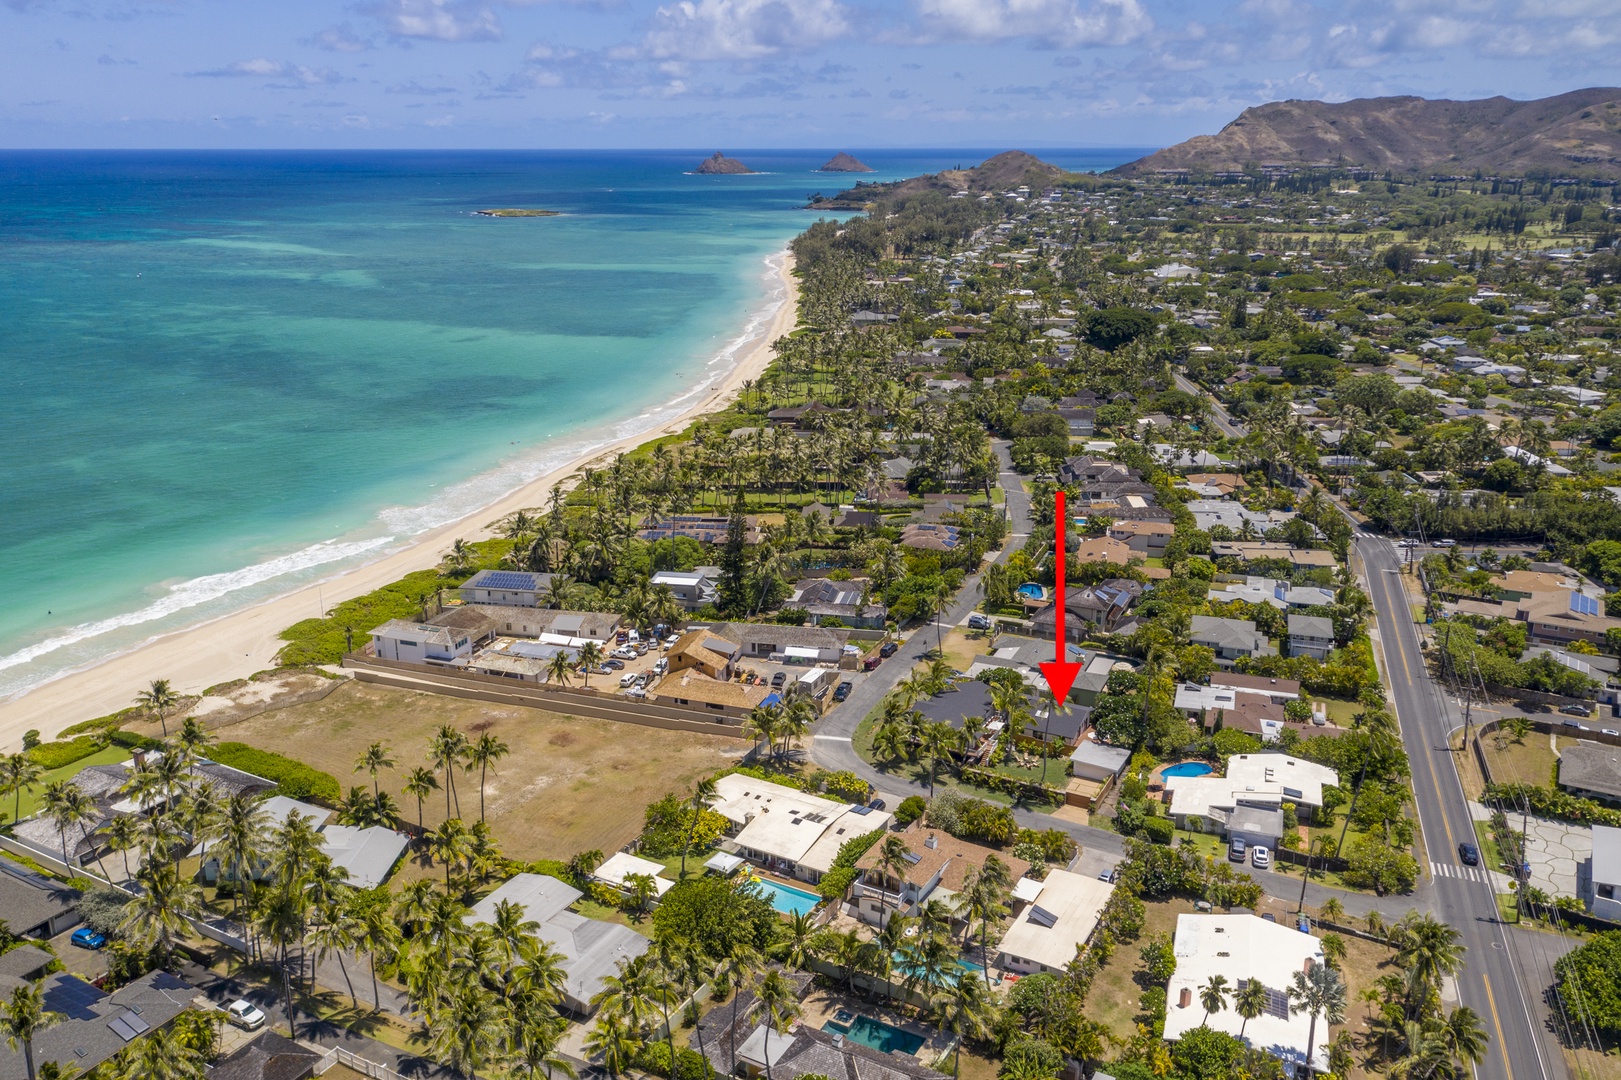 Kailua Vacation Rentals, Ranch Beach House - Great location, only a few steps away from the amazing Kailua beach.